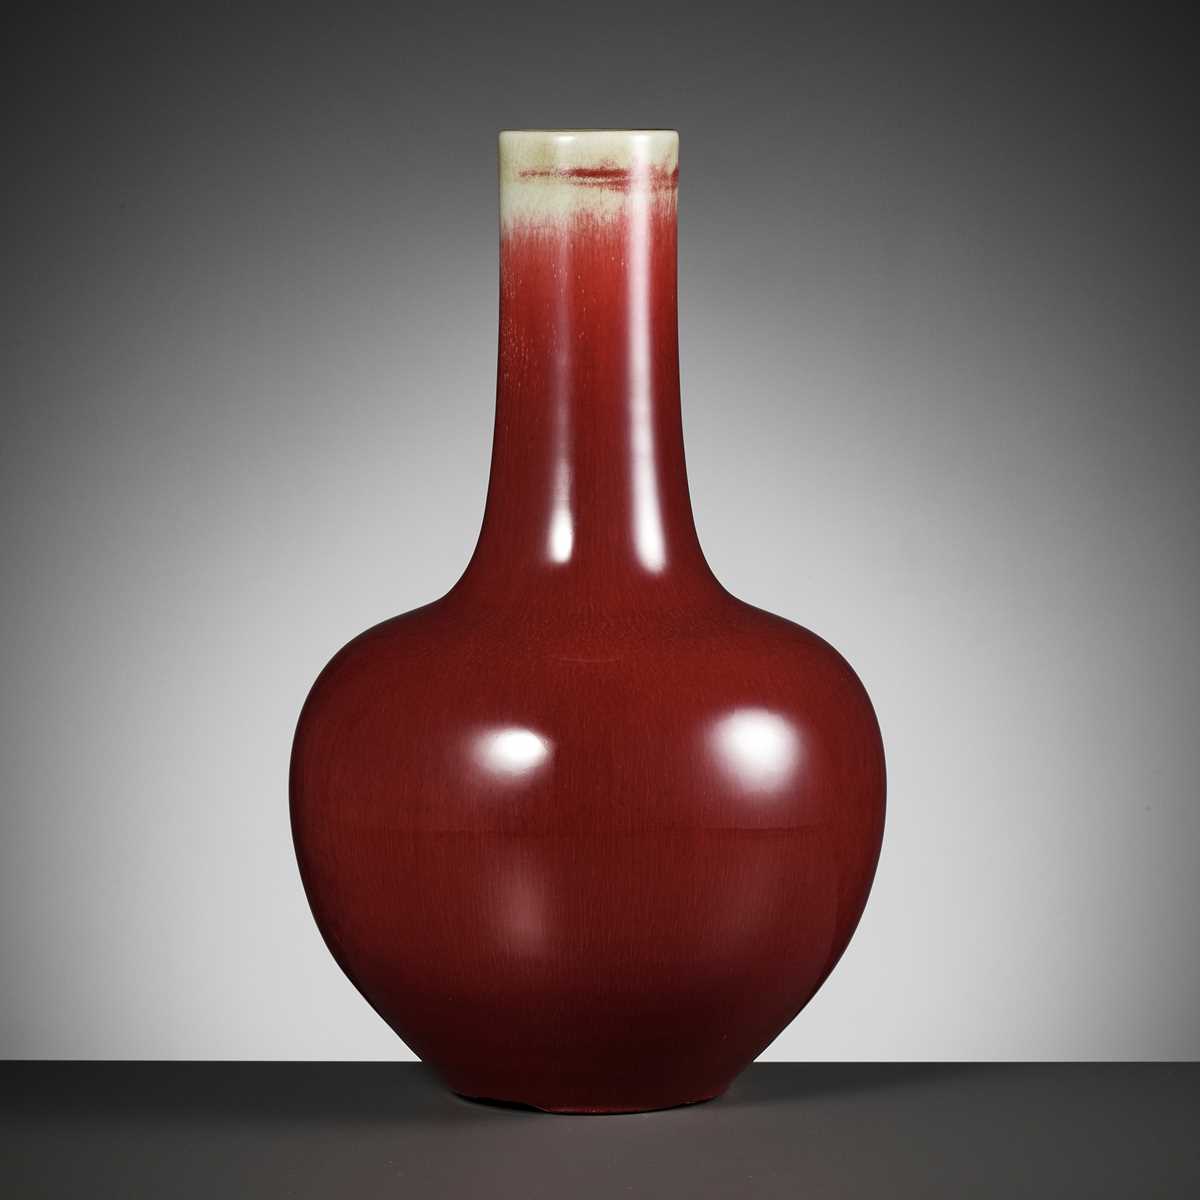 A COPPER-RED GLAZED ‘LANGYAO’ VASE, TIANQIUPING, QING DYNASTY 清代郎窯天球瓶...